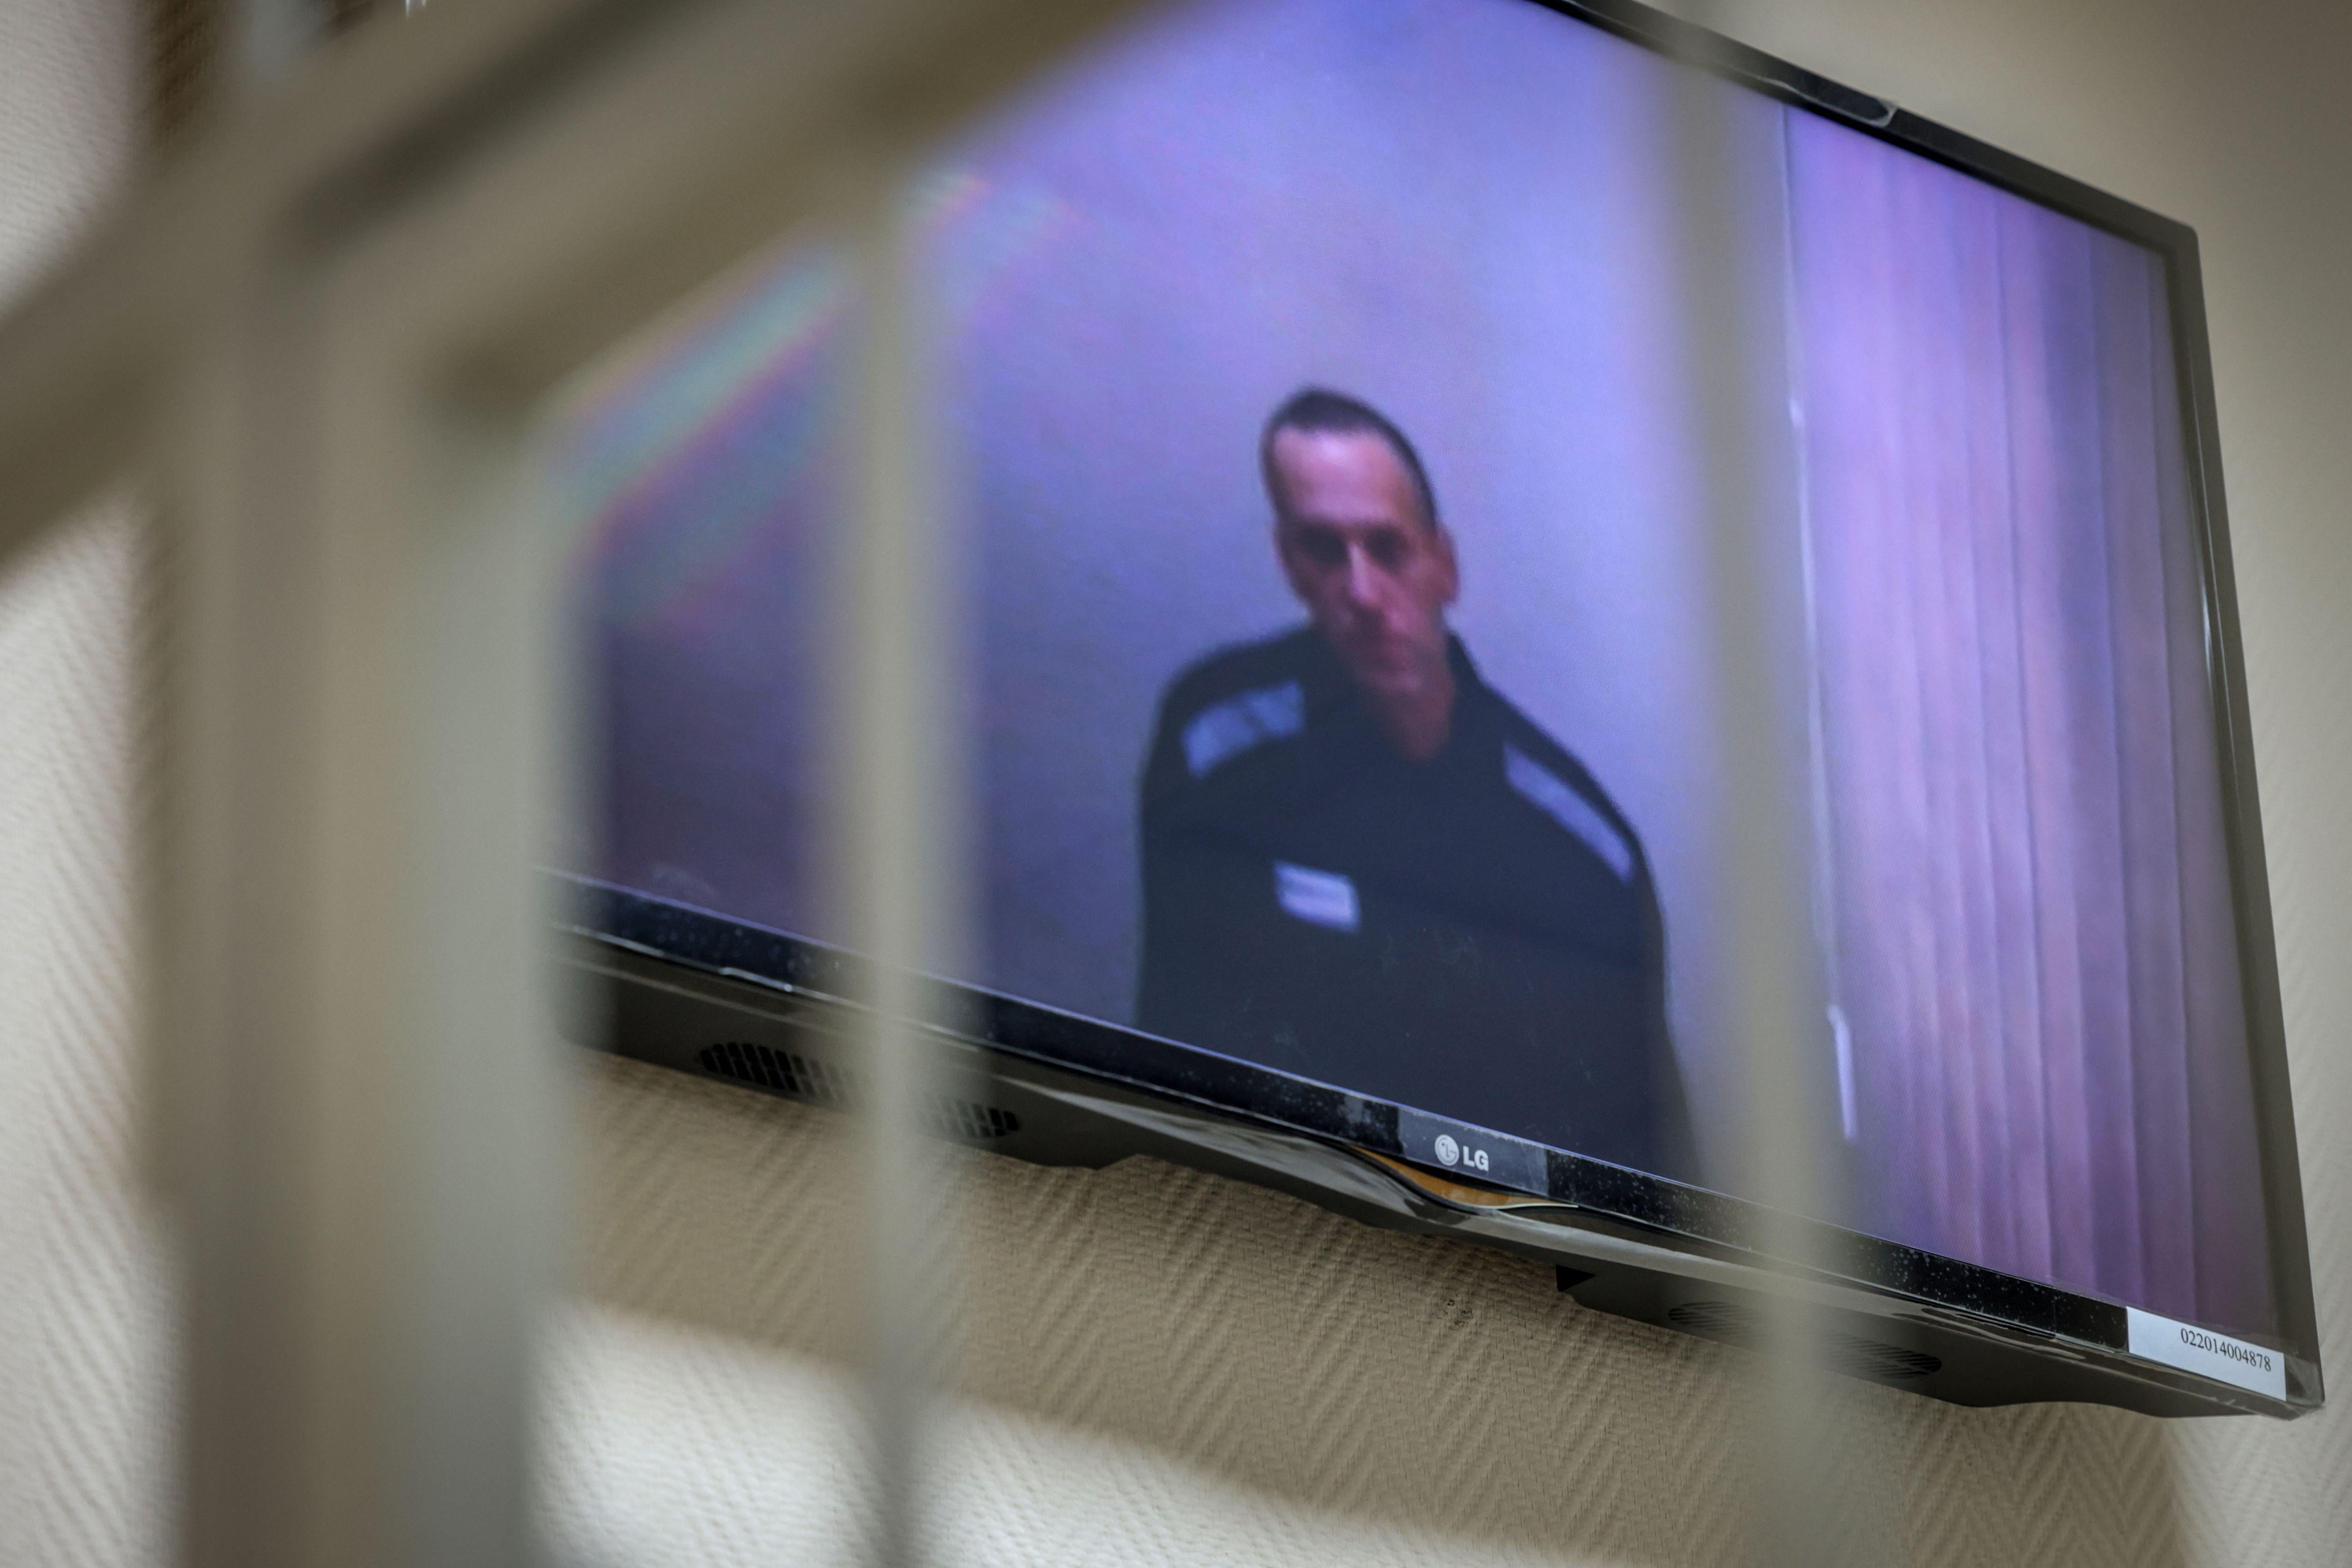 Russian opposition politician Alexei Navalny appears on screen via a video link from prison during a court hearing on May 26, 2021.